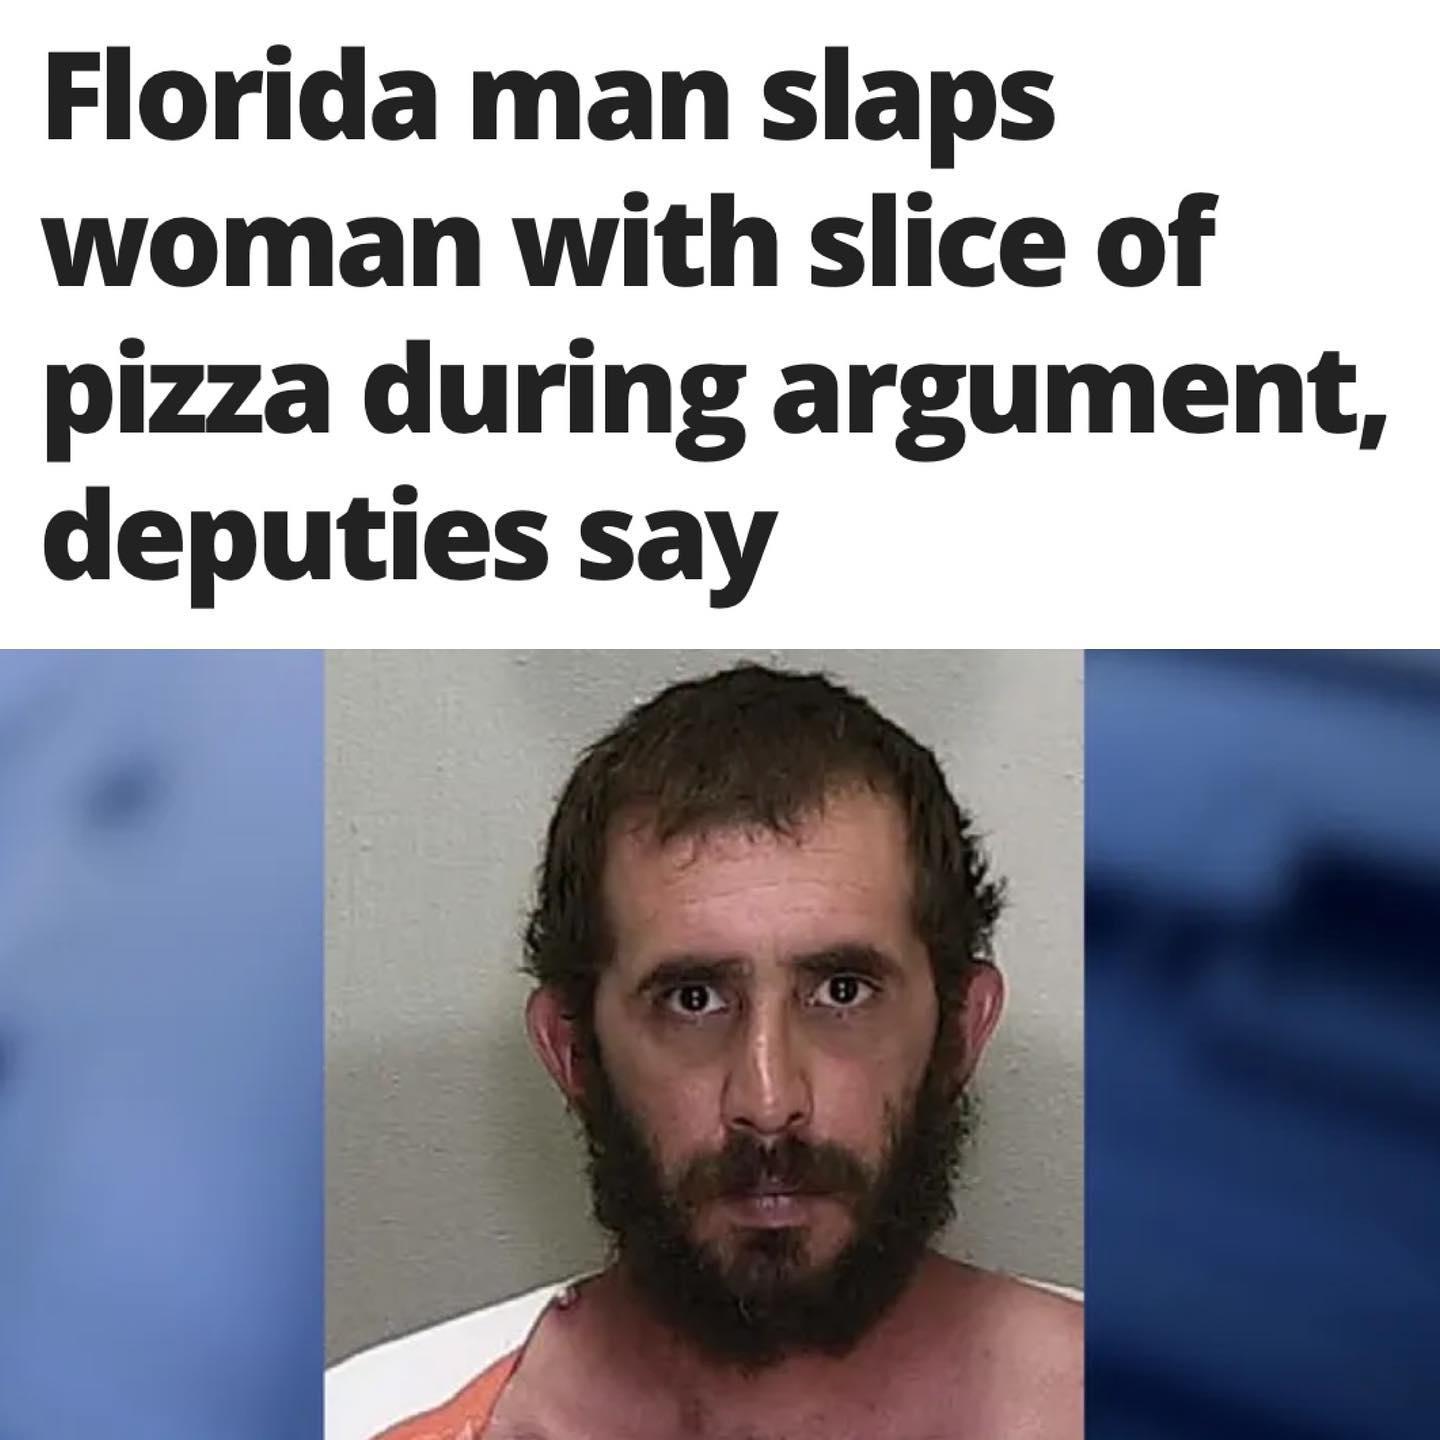 Here Are 5 Of The Internets Best Florida Man Memes